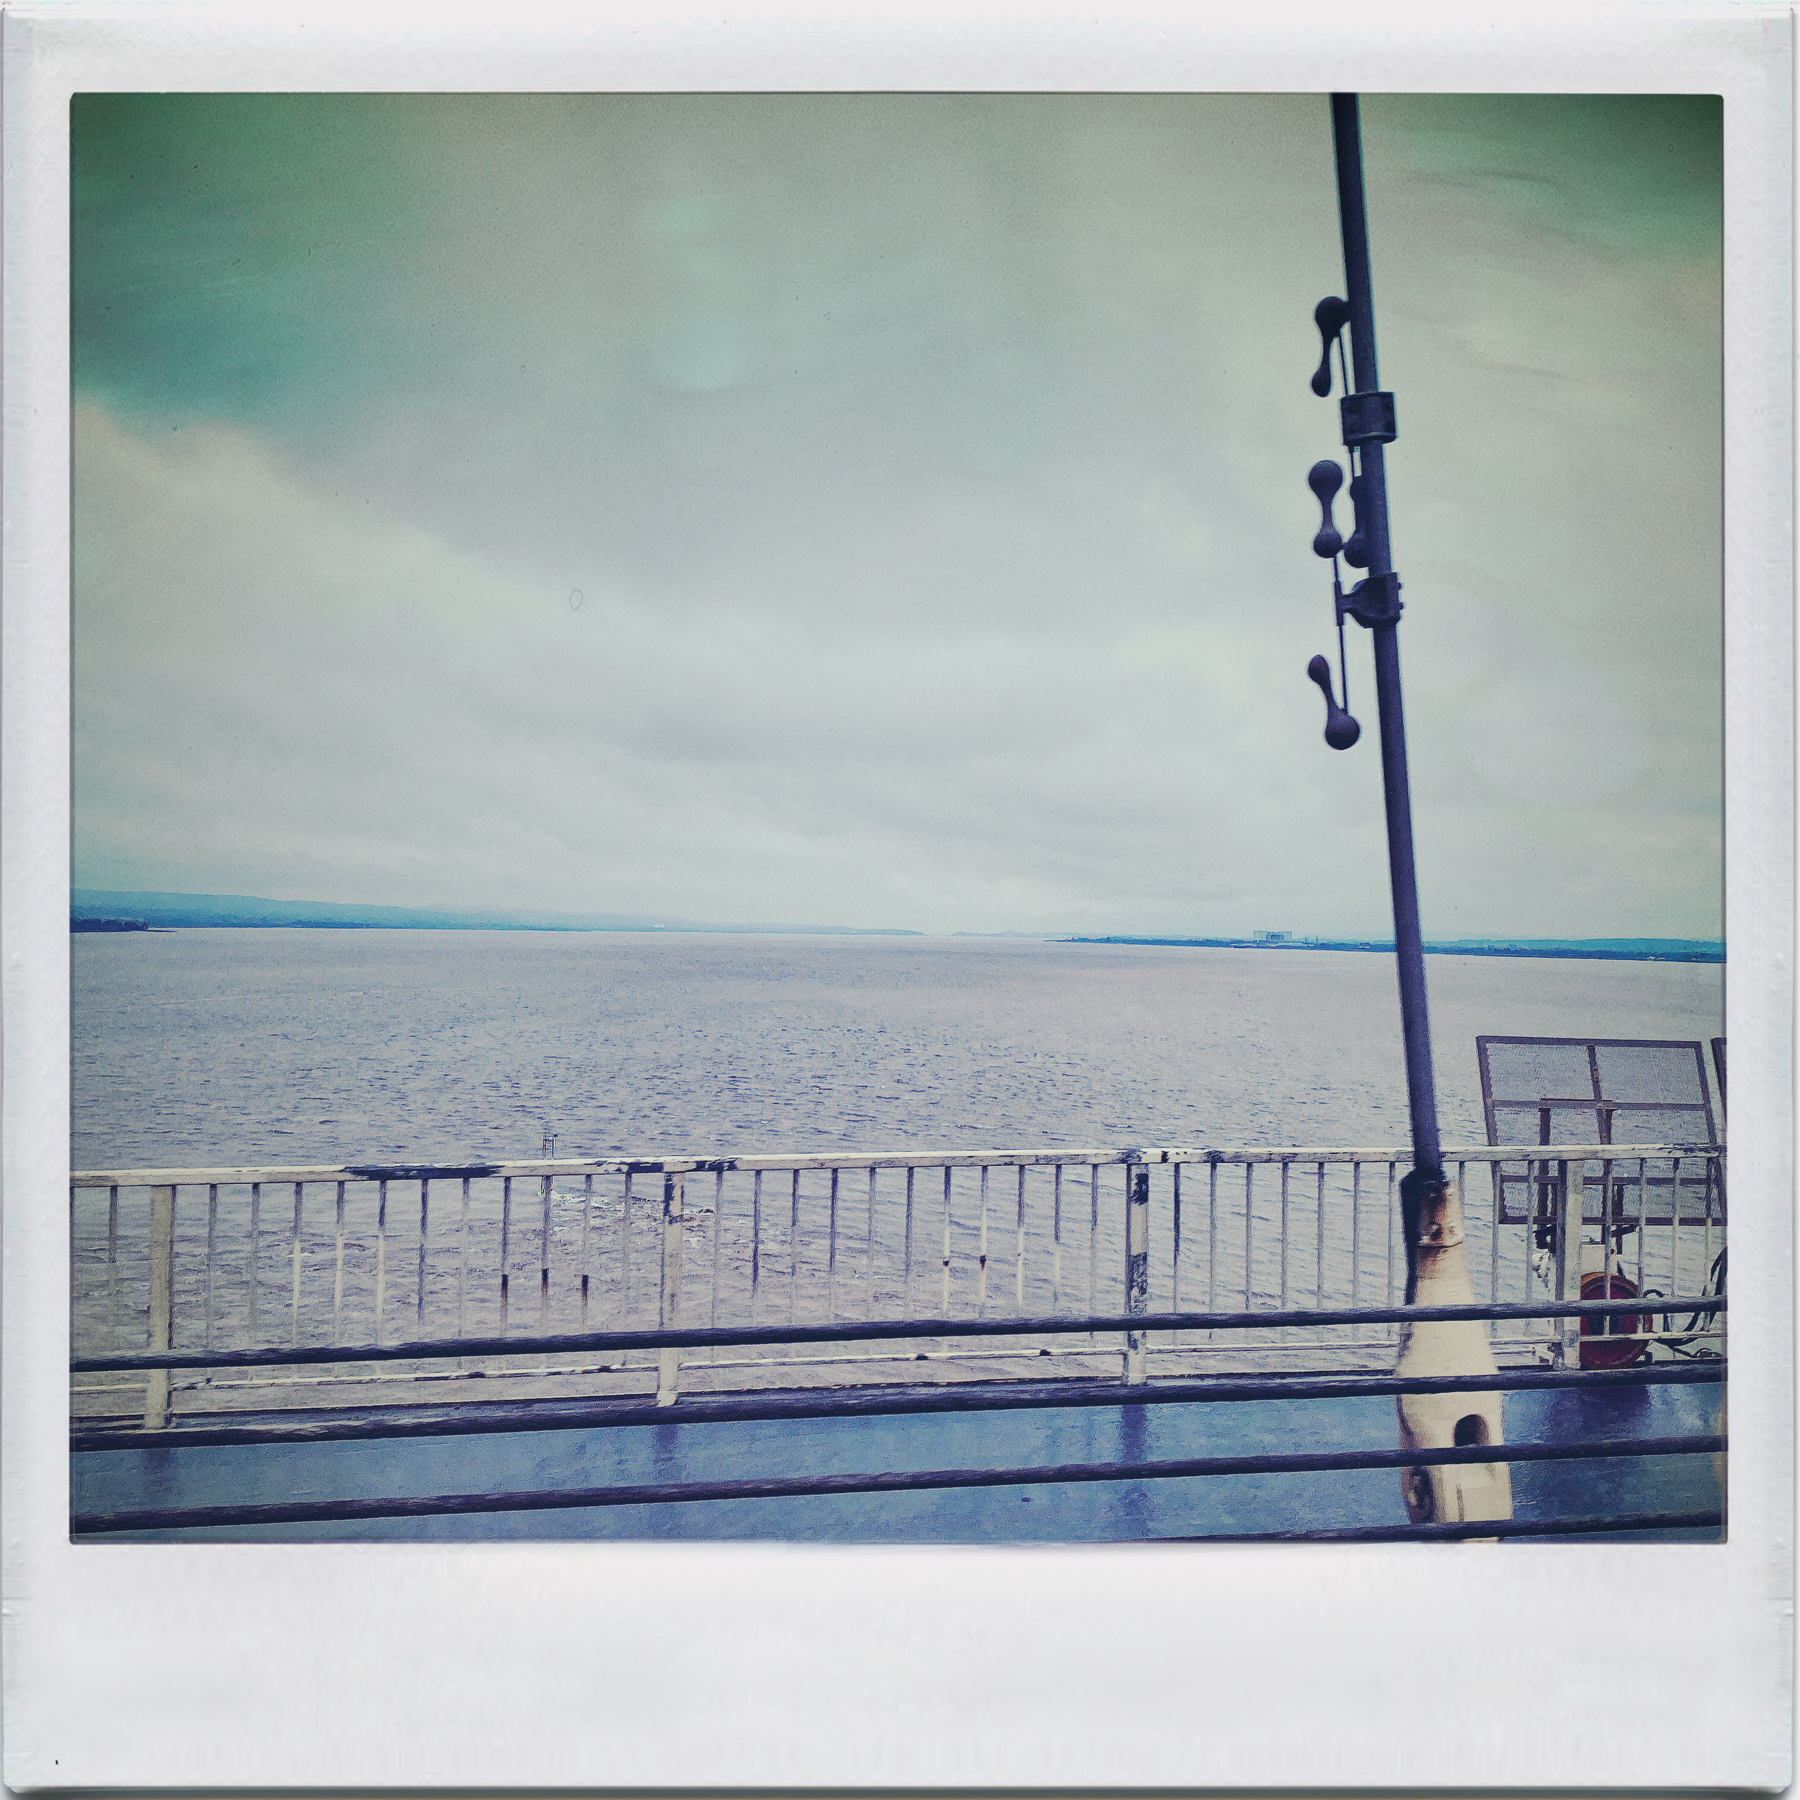 A vintage-style photograph of a sea view from a pier with a metal railing and a lamp post, under an overcast sky.